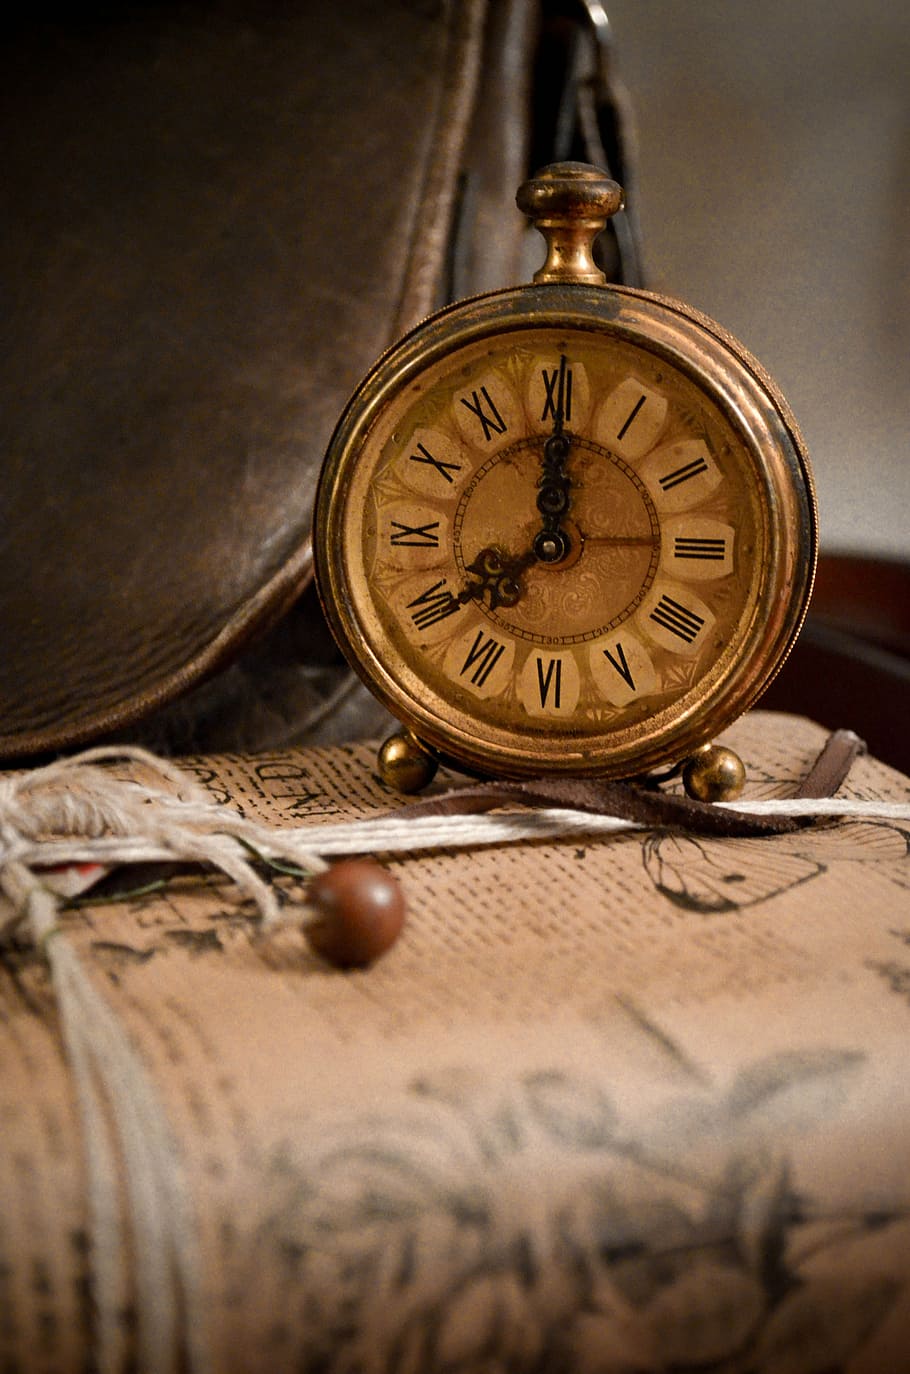 watch, vintage, old, out of the, retro, antique, old-fashioned, clock, pocket Watch, time